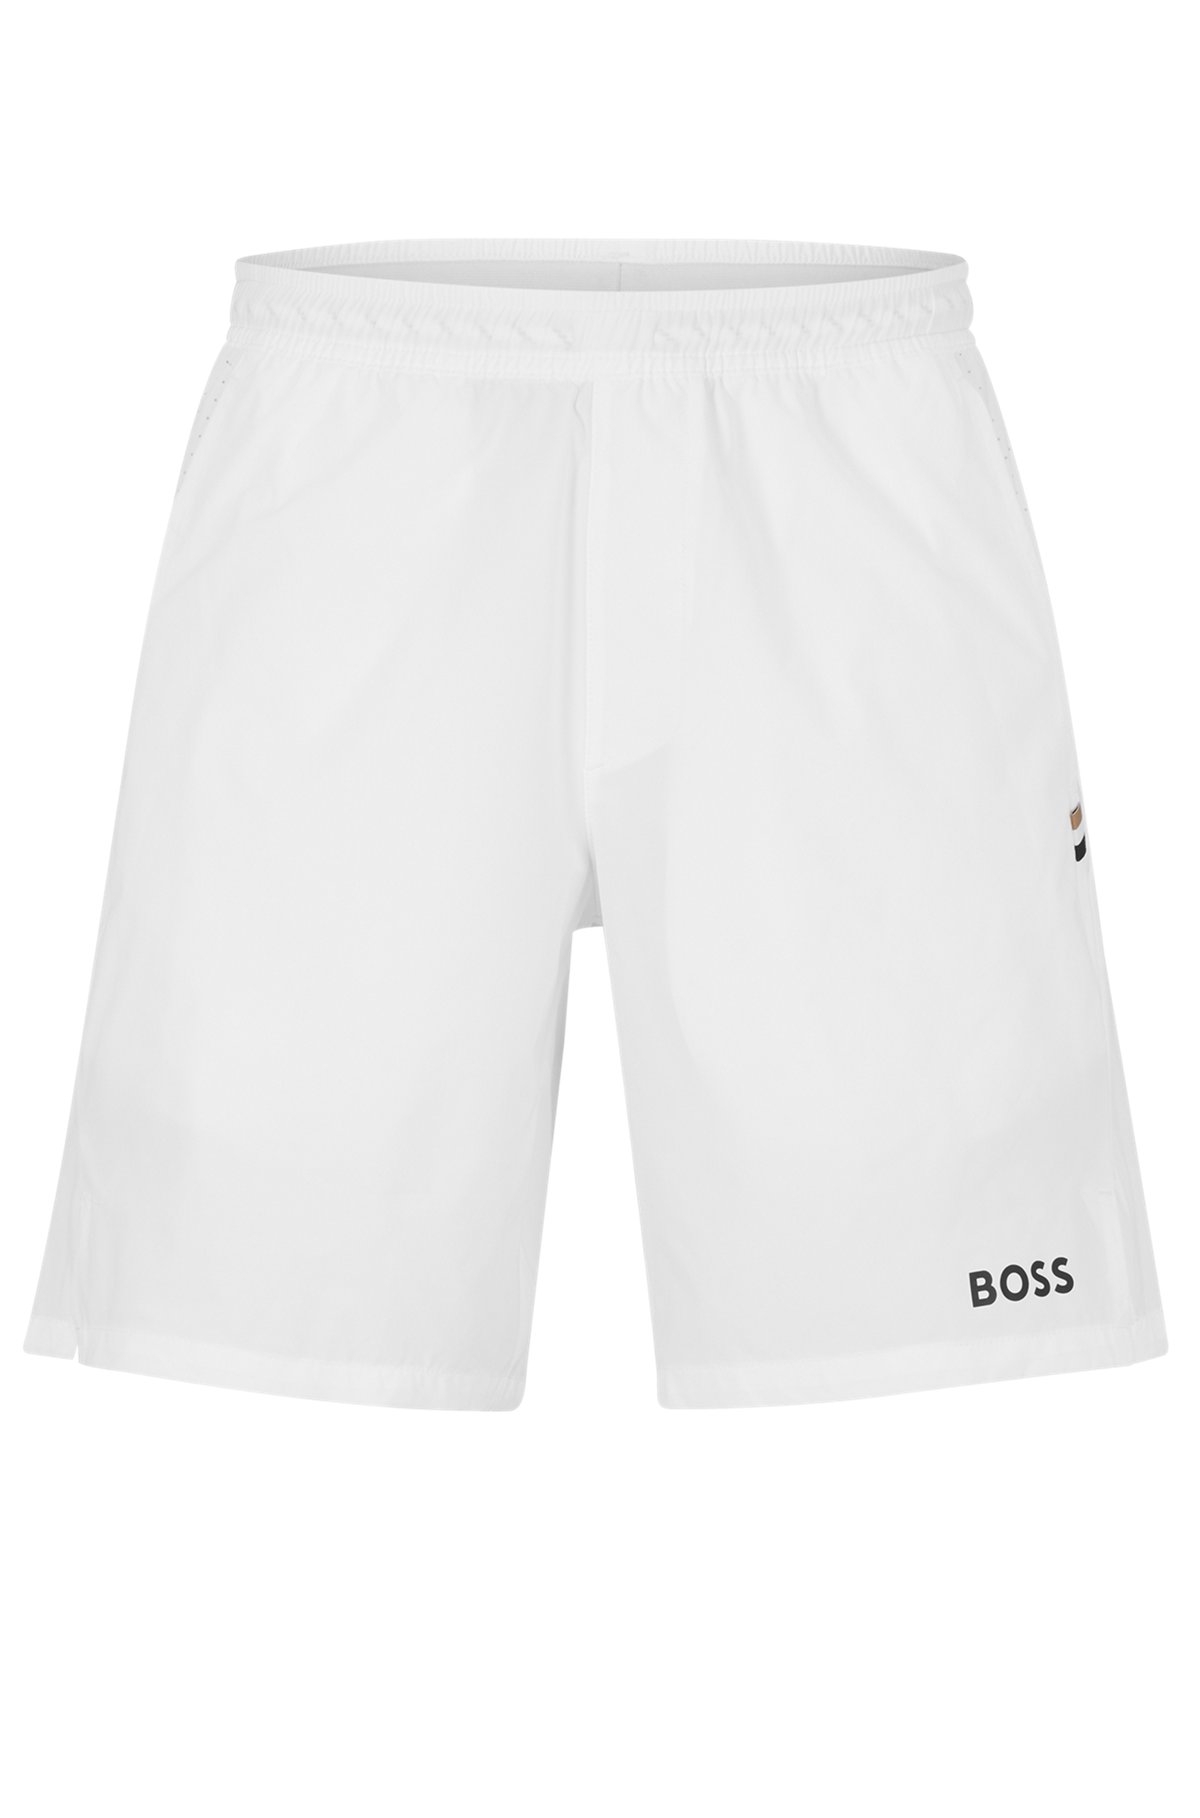 BOSS x Matteo Berrettini performance-stretch shorts with logo detail and mesh accents, White